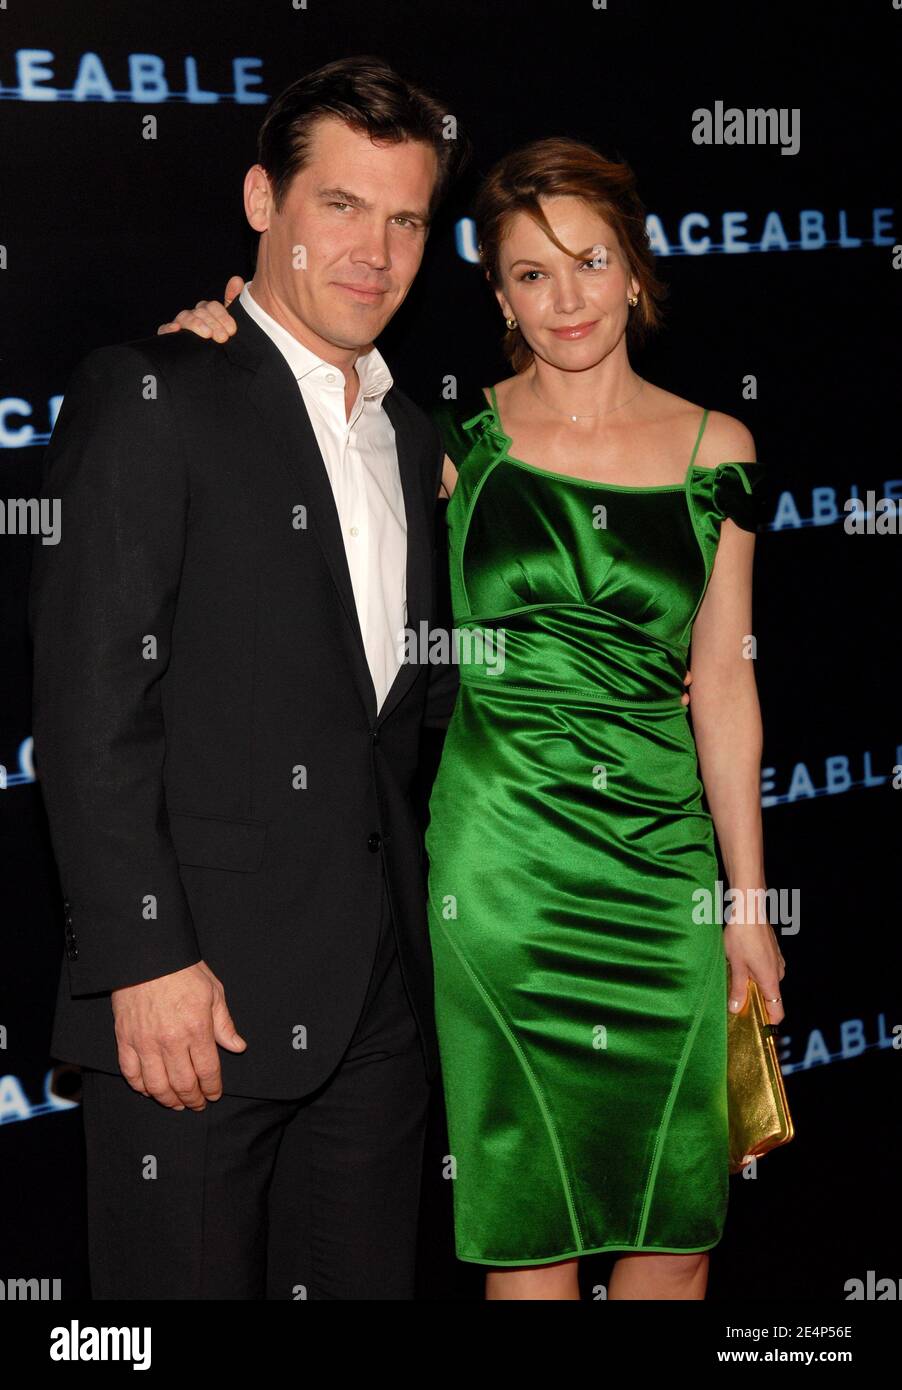 Diane Lane and Josh Brolin attend the premiere of 'Untraceable,' at the Silver Screen Theatre in Los Angeles, CA, USA on January 22, 2008. Photo by Lionel Hahn/ABACAPRESS.COM Stock Photo